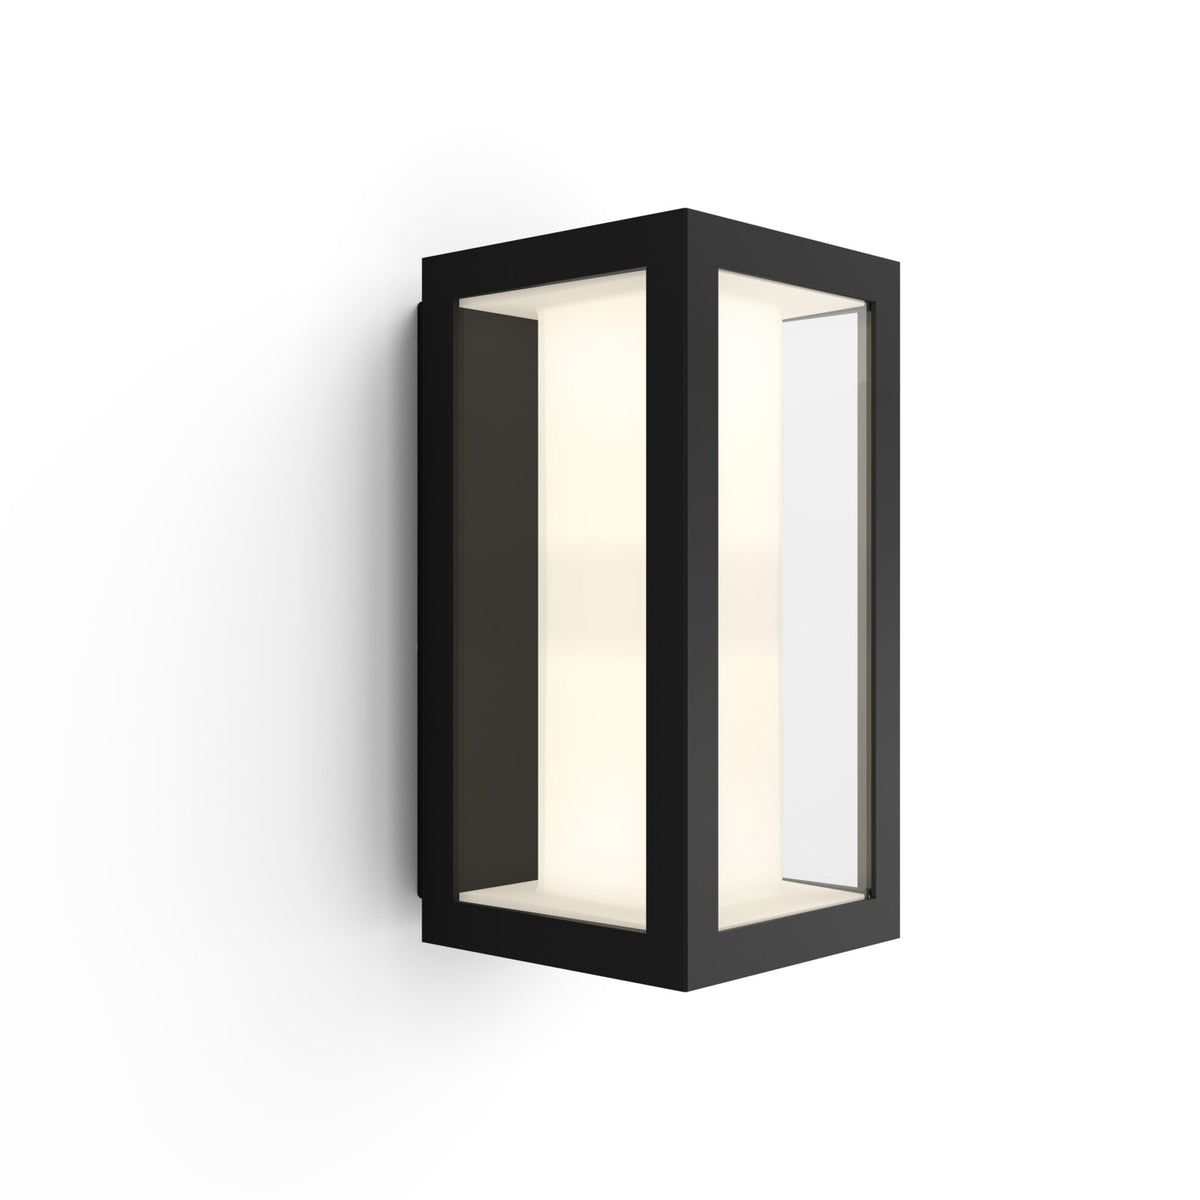 Philips Hue Impress Outdoor Wall light in Black - White and colour ambience (Pack of 1)